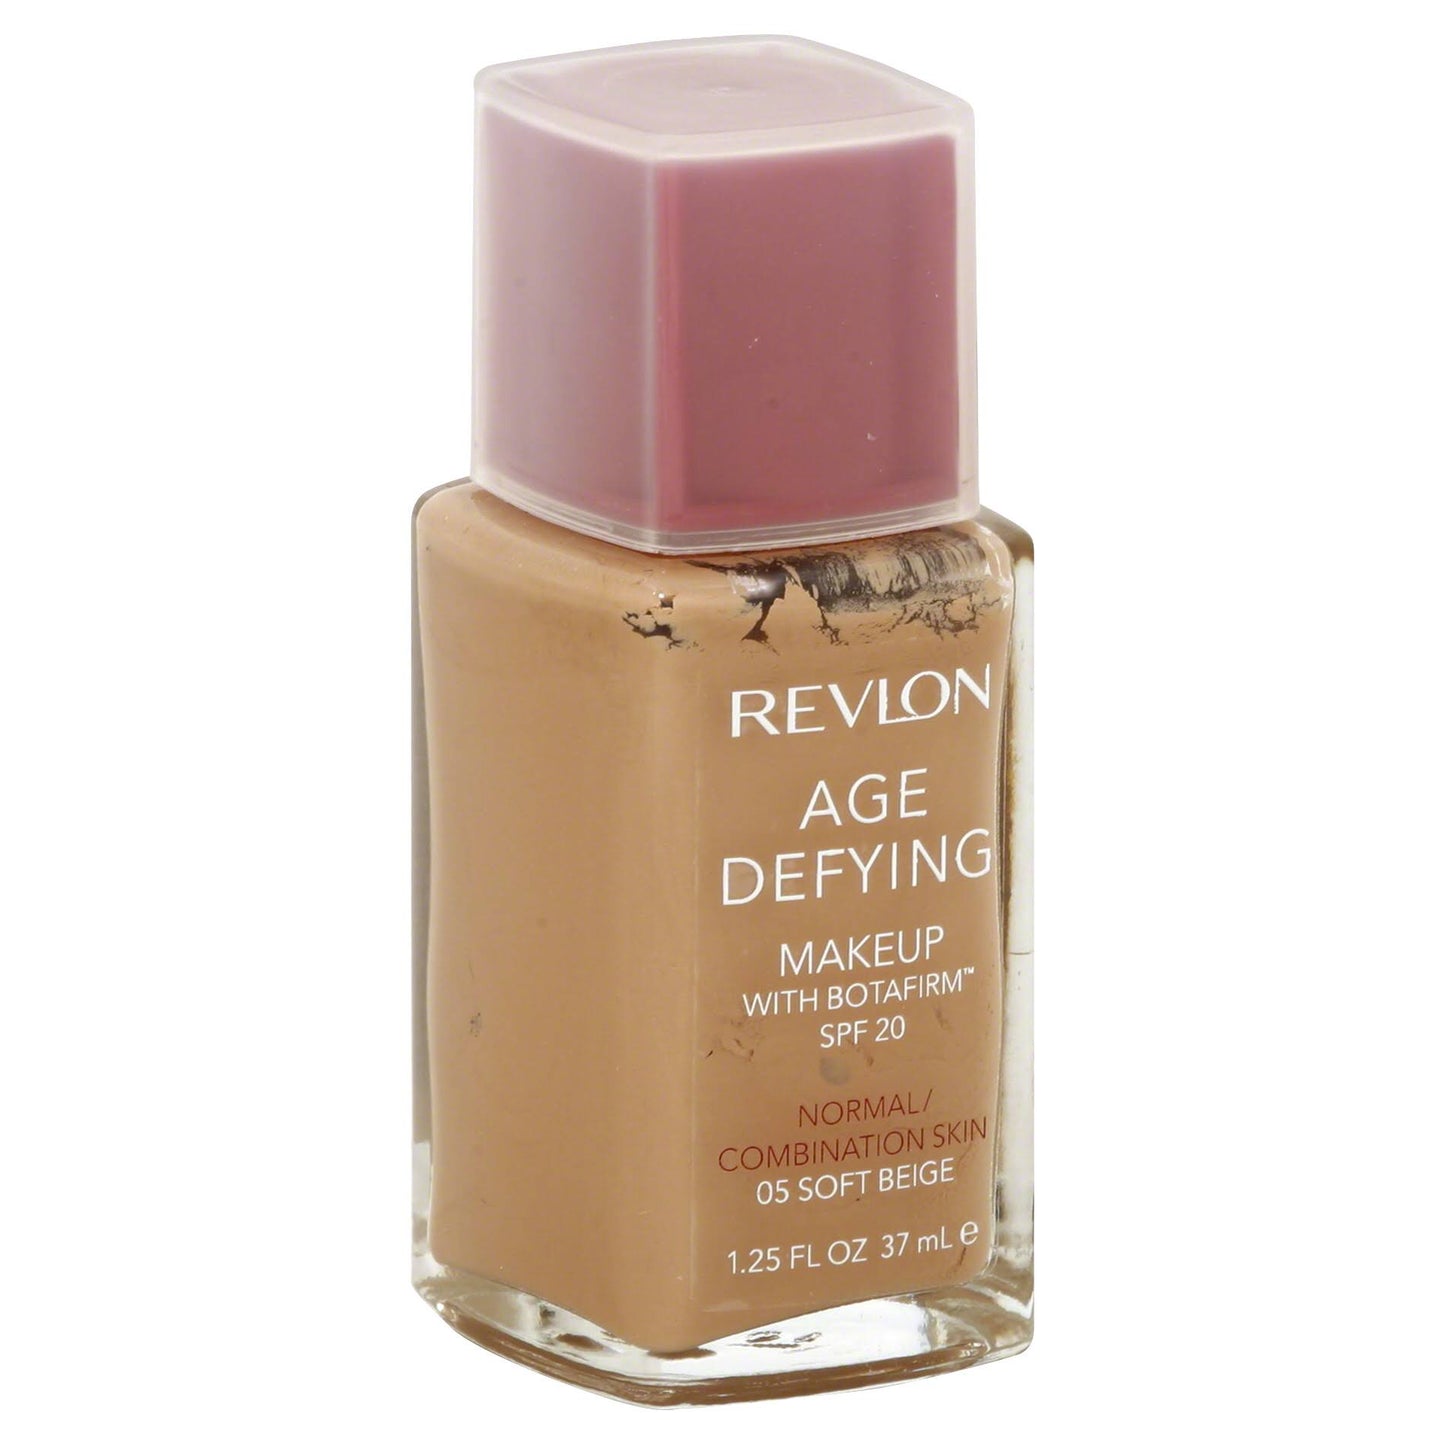 REVLON Age Defying Makeup with Botafirm, SPF 20, Normal/Combination Skin, Soft Beige 05, 1.25-Ounce - ADDROS.COM